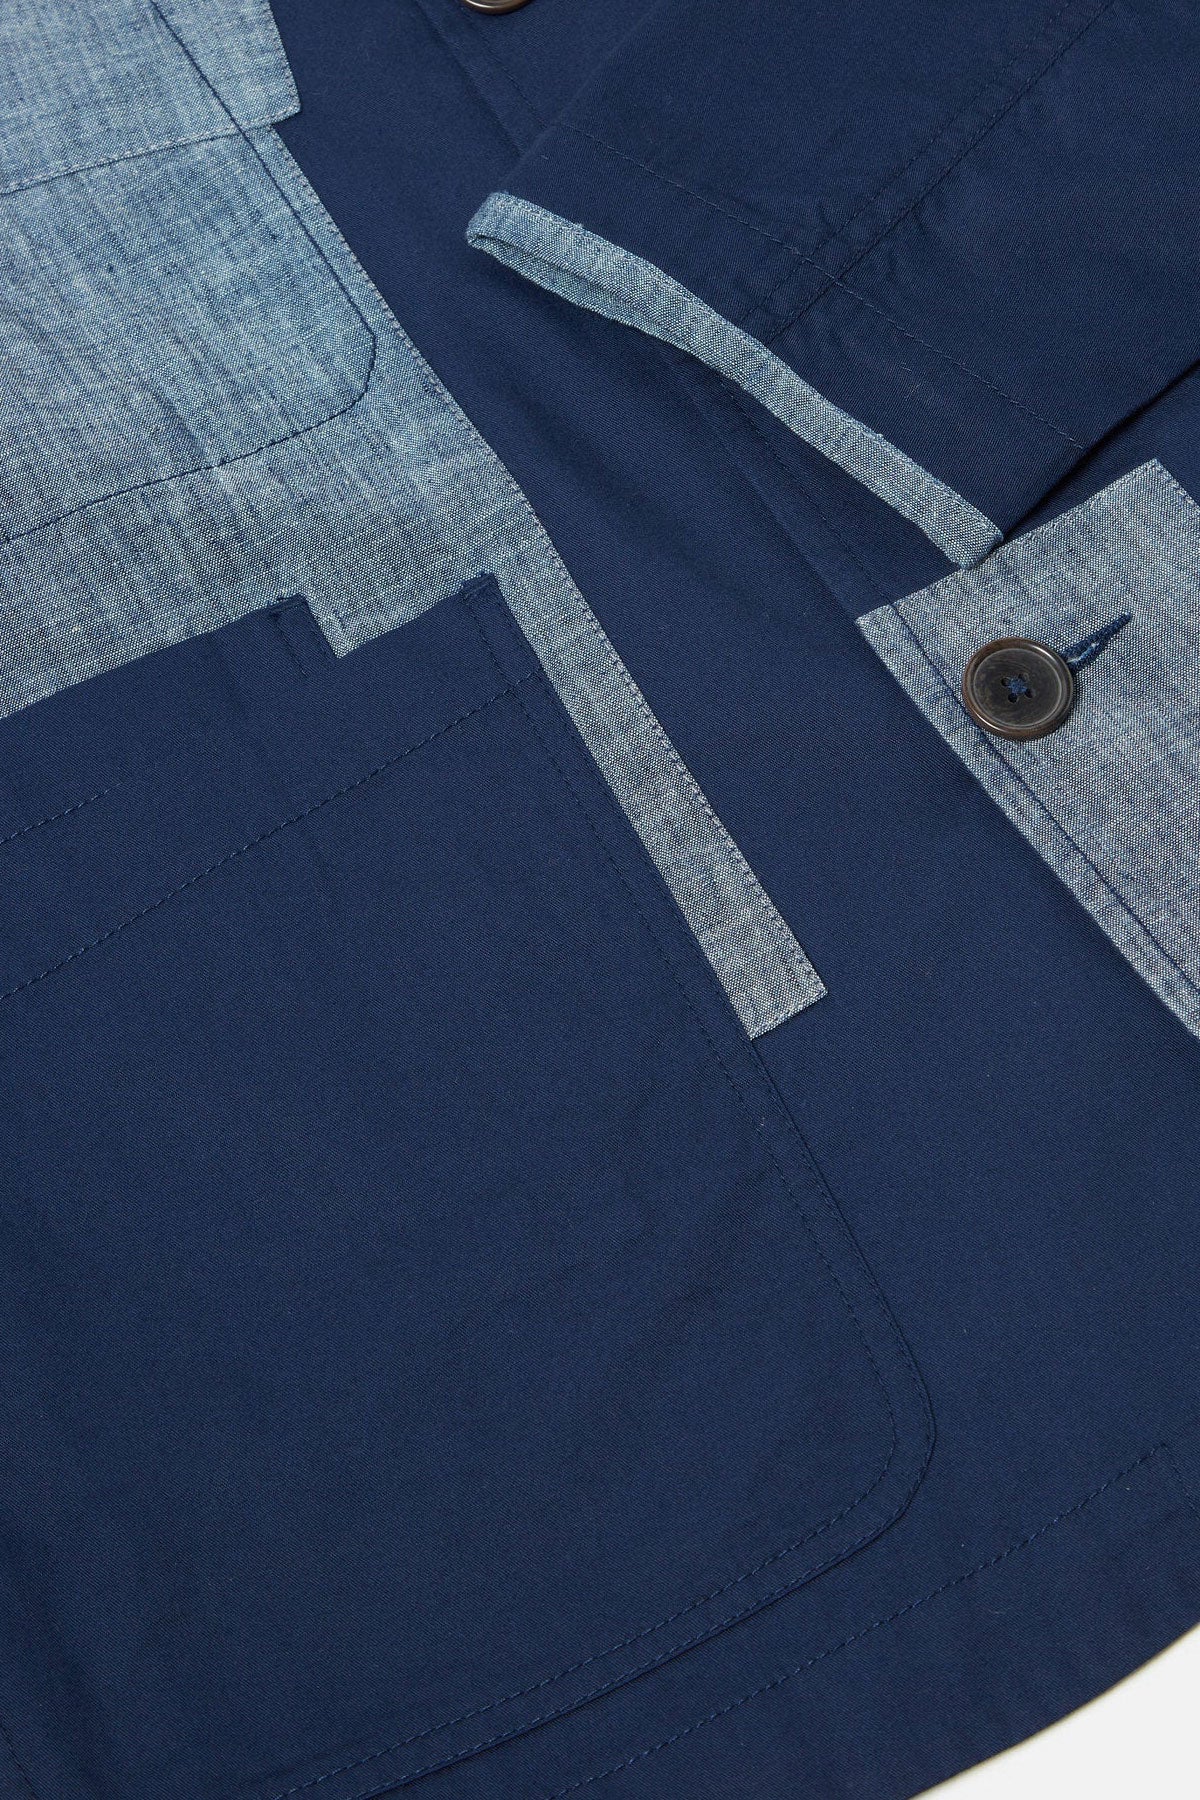 Universal Works - Patched Bakers Jacket In Navy Fine Twill Chambray